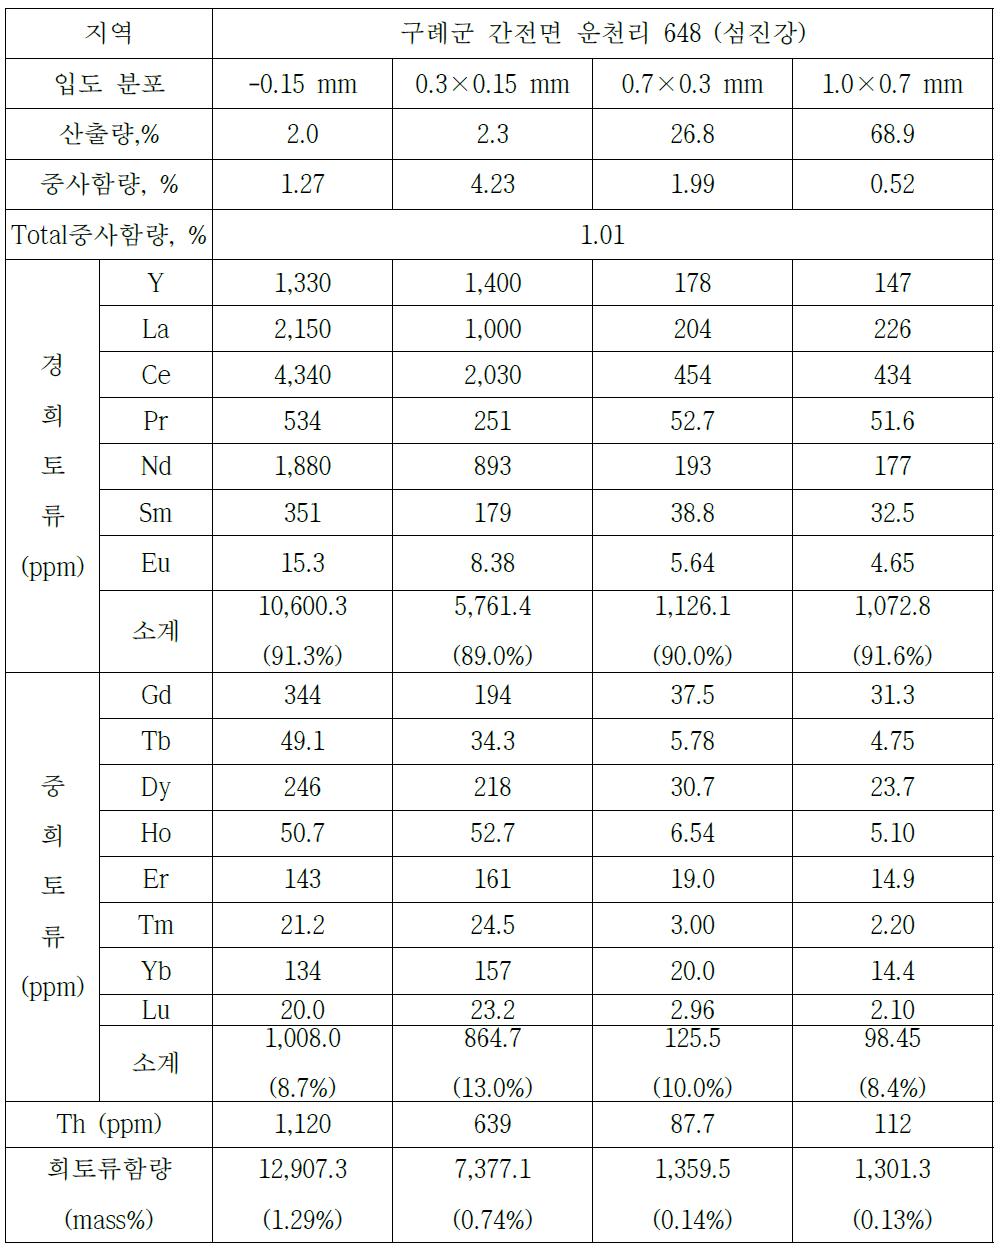 Rare earth element (REE) contents in heavy mineral sand collected from Seomjin River (1)